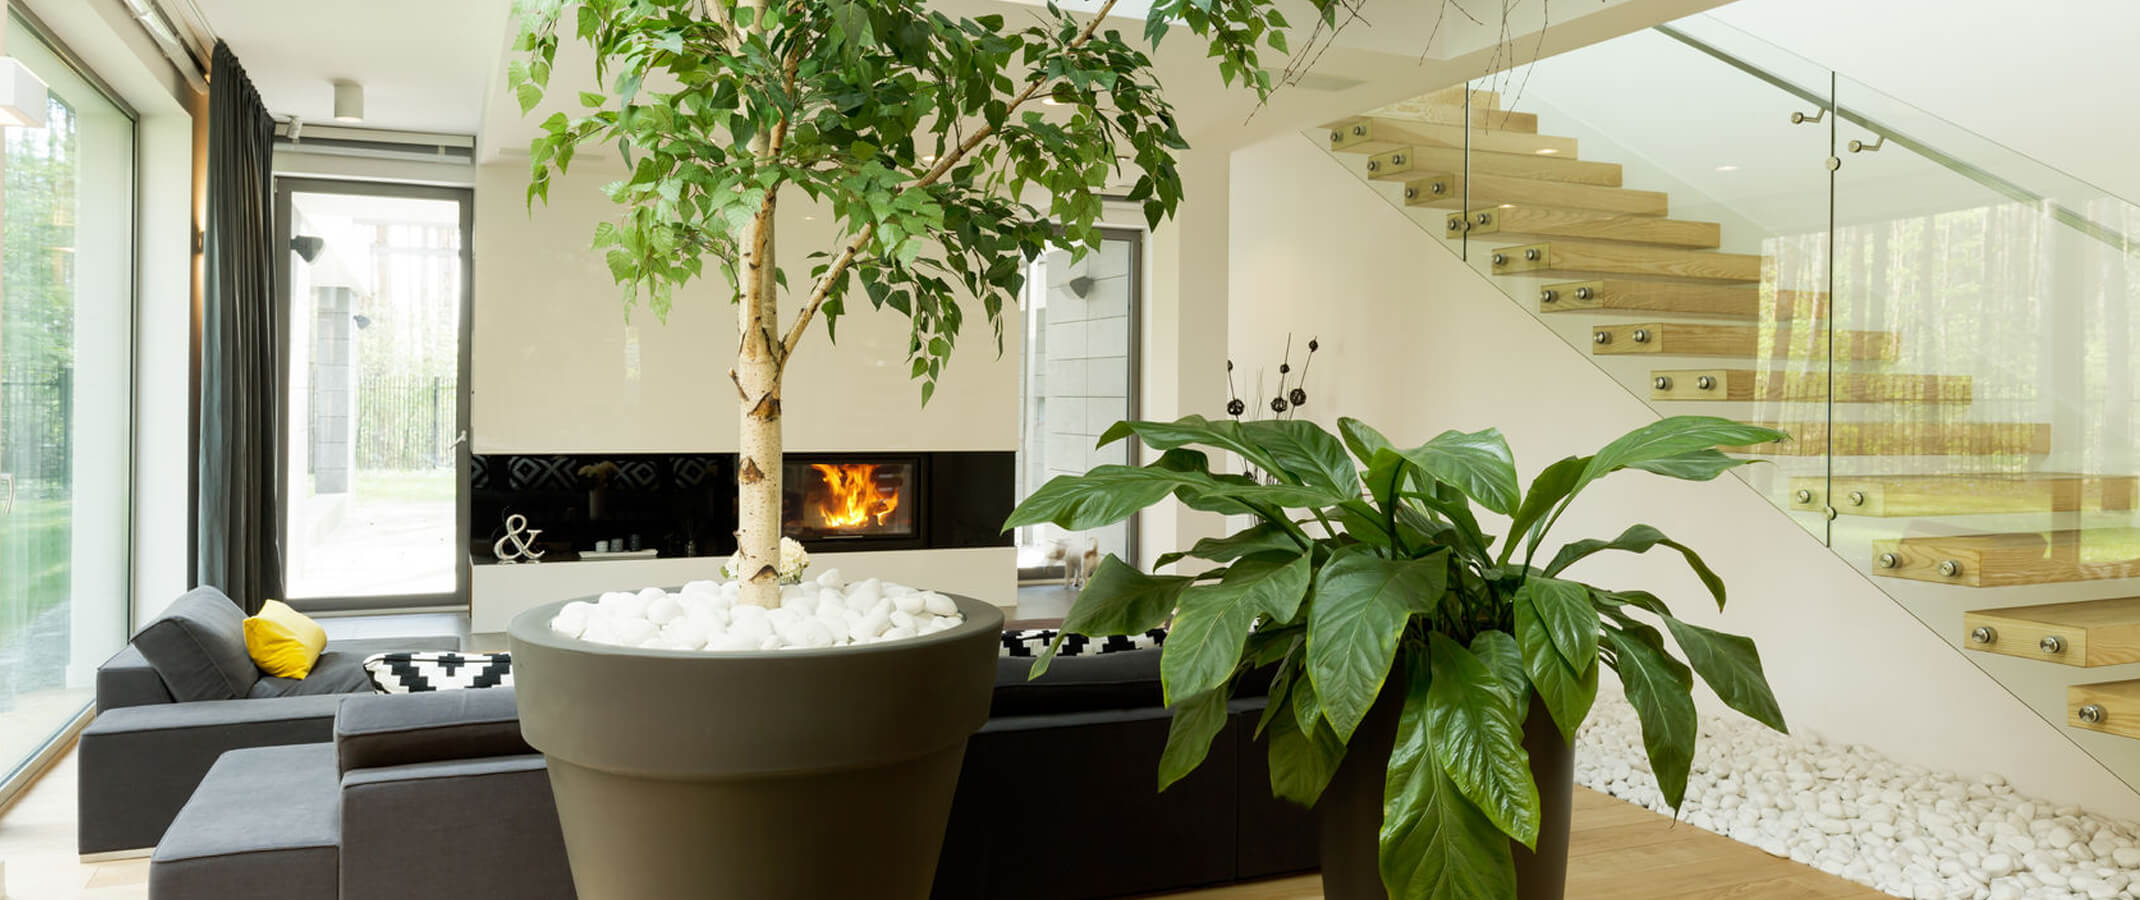 Large ficus tree houseplant and another large houseplant in a beautiful large living room with couch, and fire place